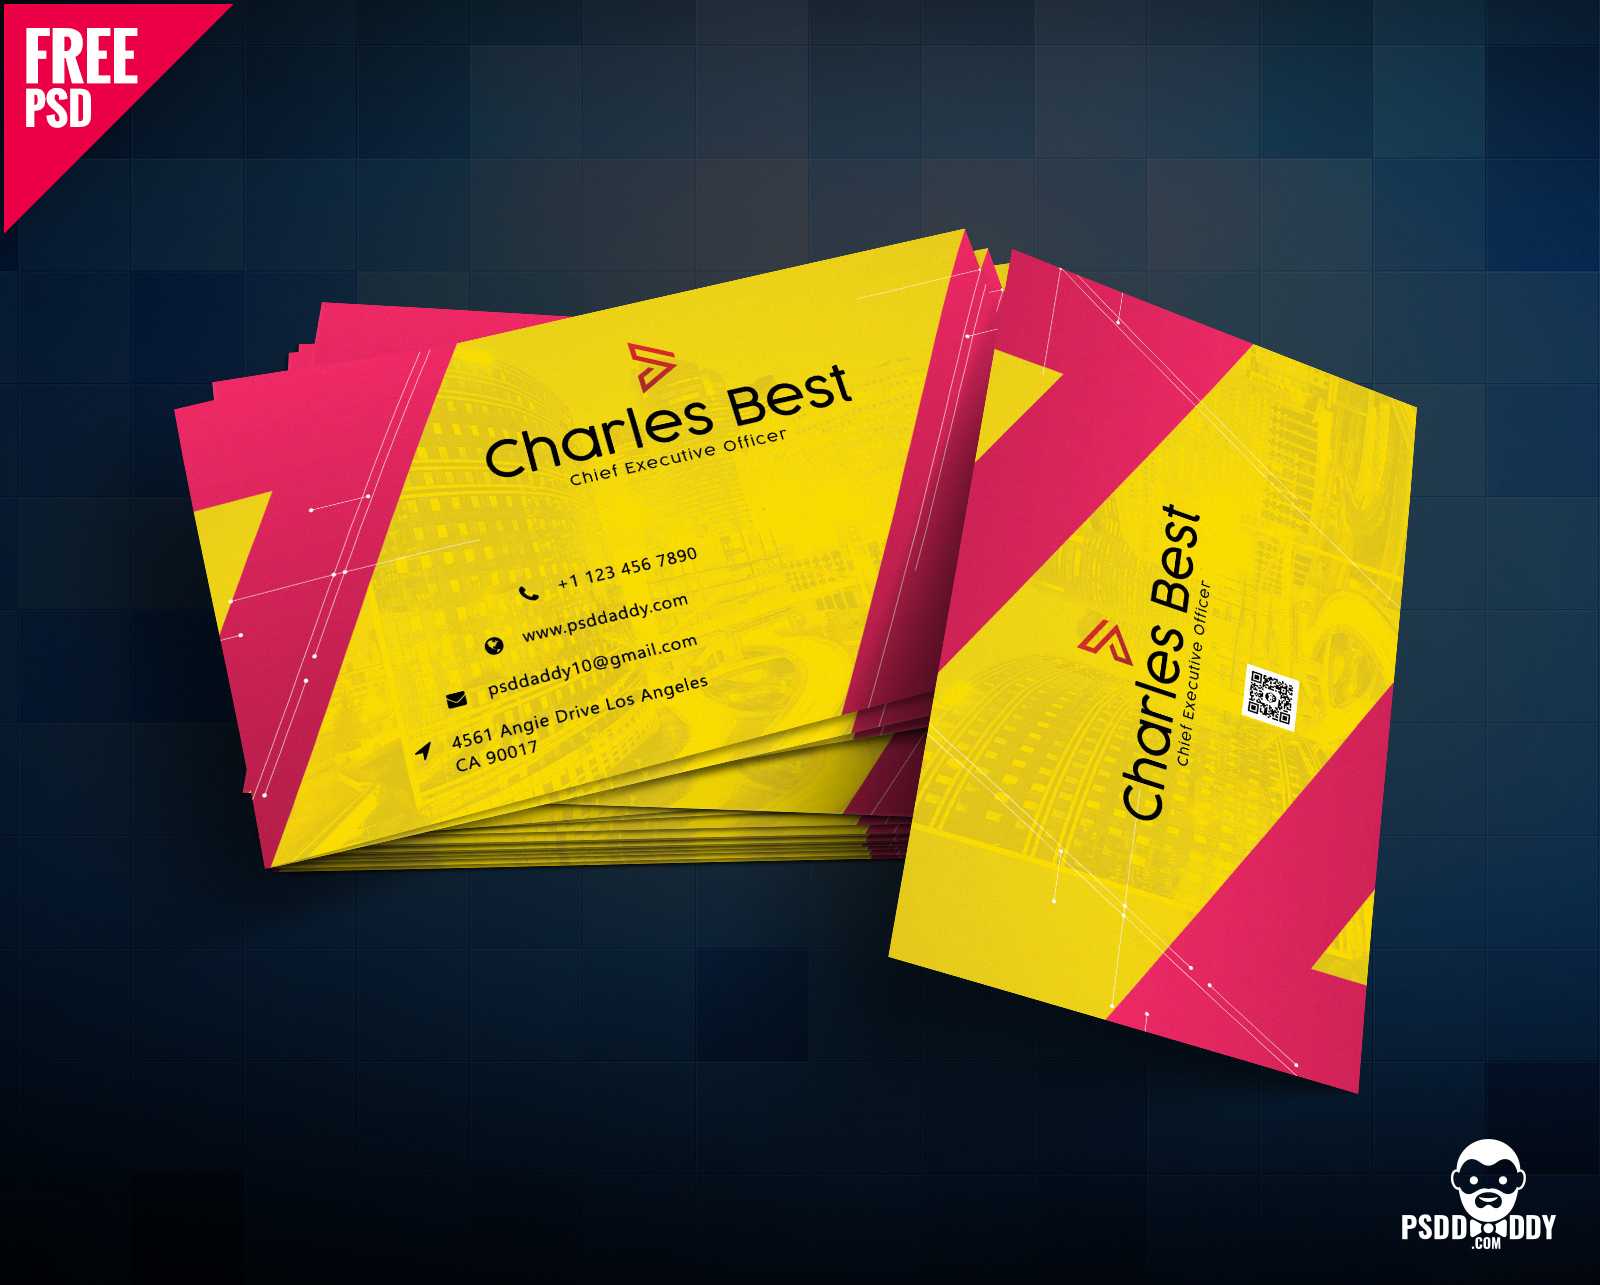 Download] Creative Business Card Free Psd | Psddaddy Within Photoshop Business Card Template With Bleed